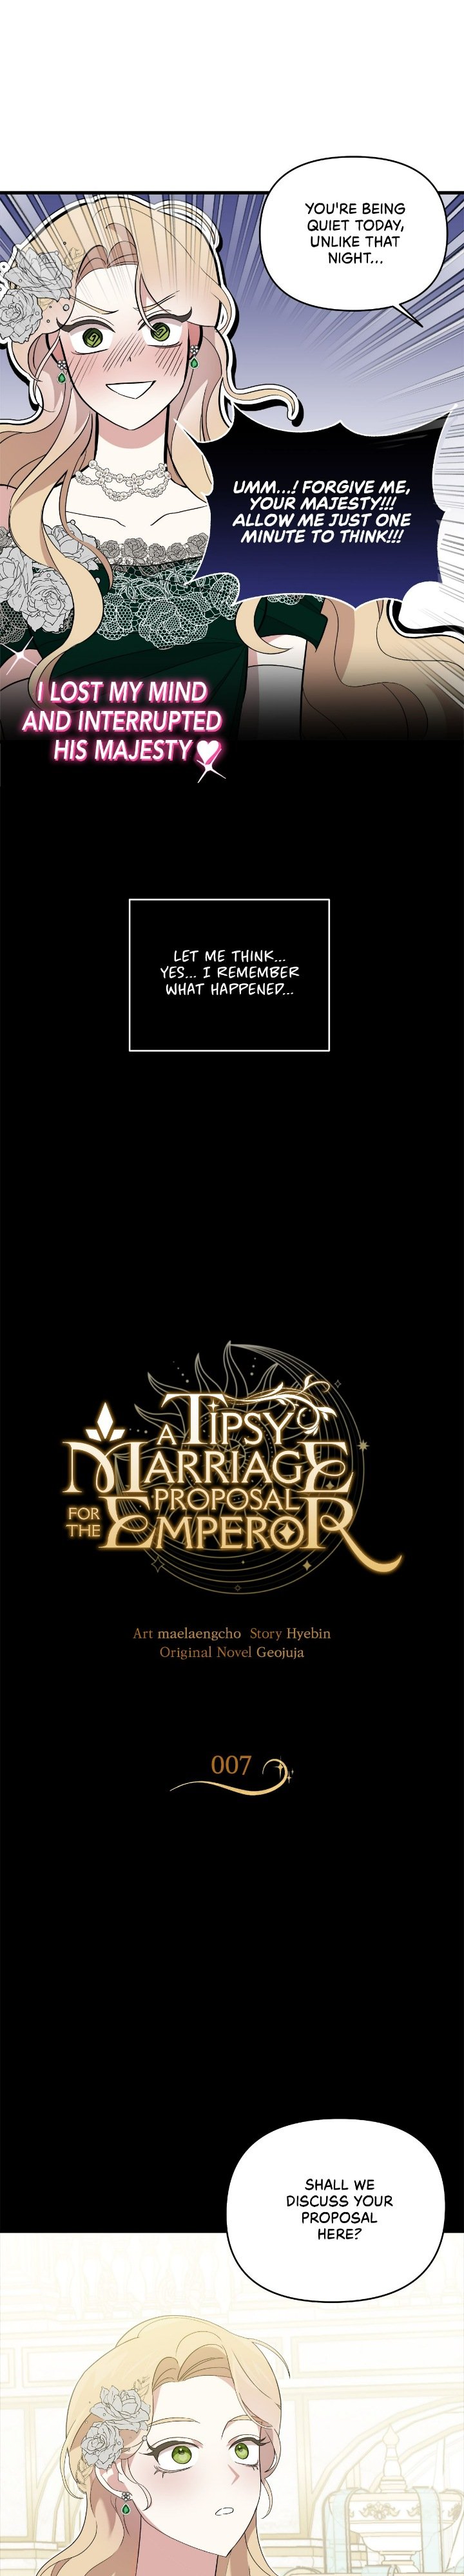 A Tipsy Marriage Proposal for the Emperor chapter 7